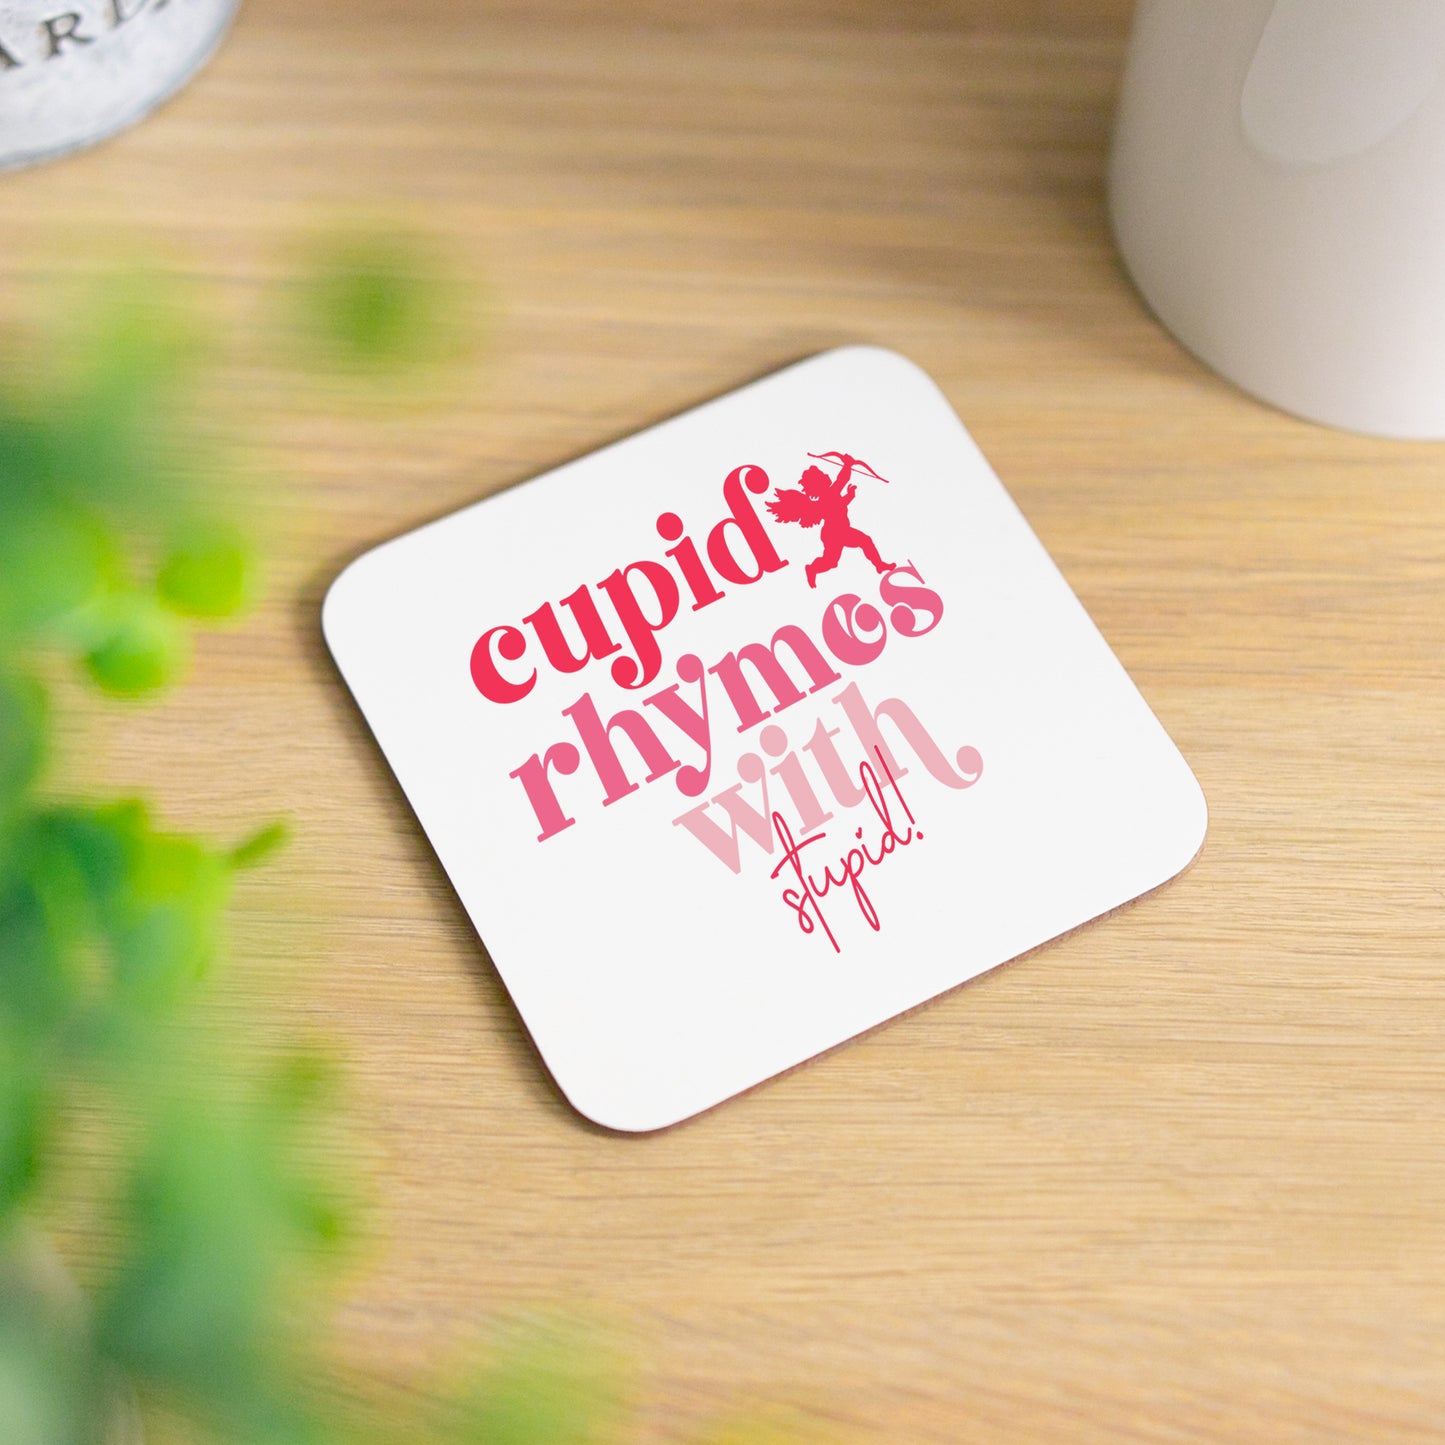 Cupid Rhymes With Stupid Mug and/or Coaster Set  - Always Looking Good - Coaster On Its Own  